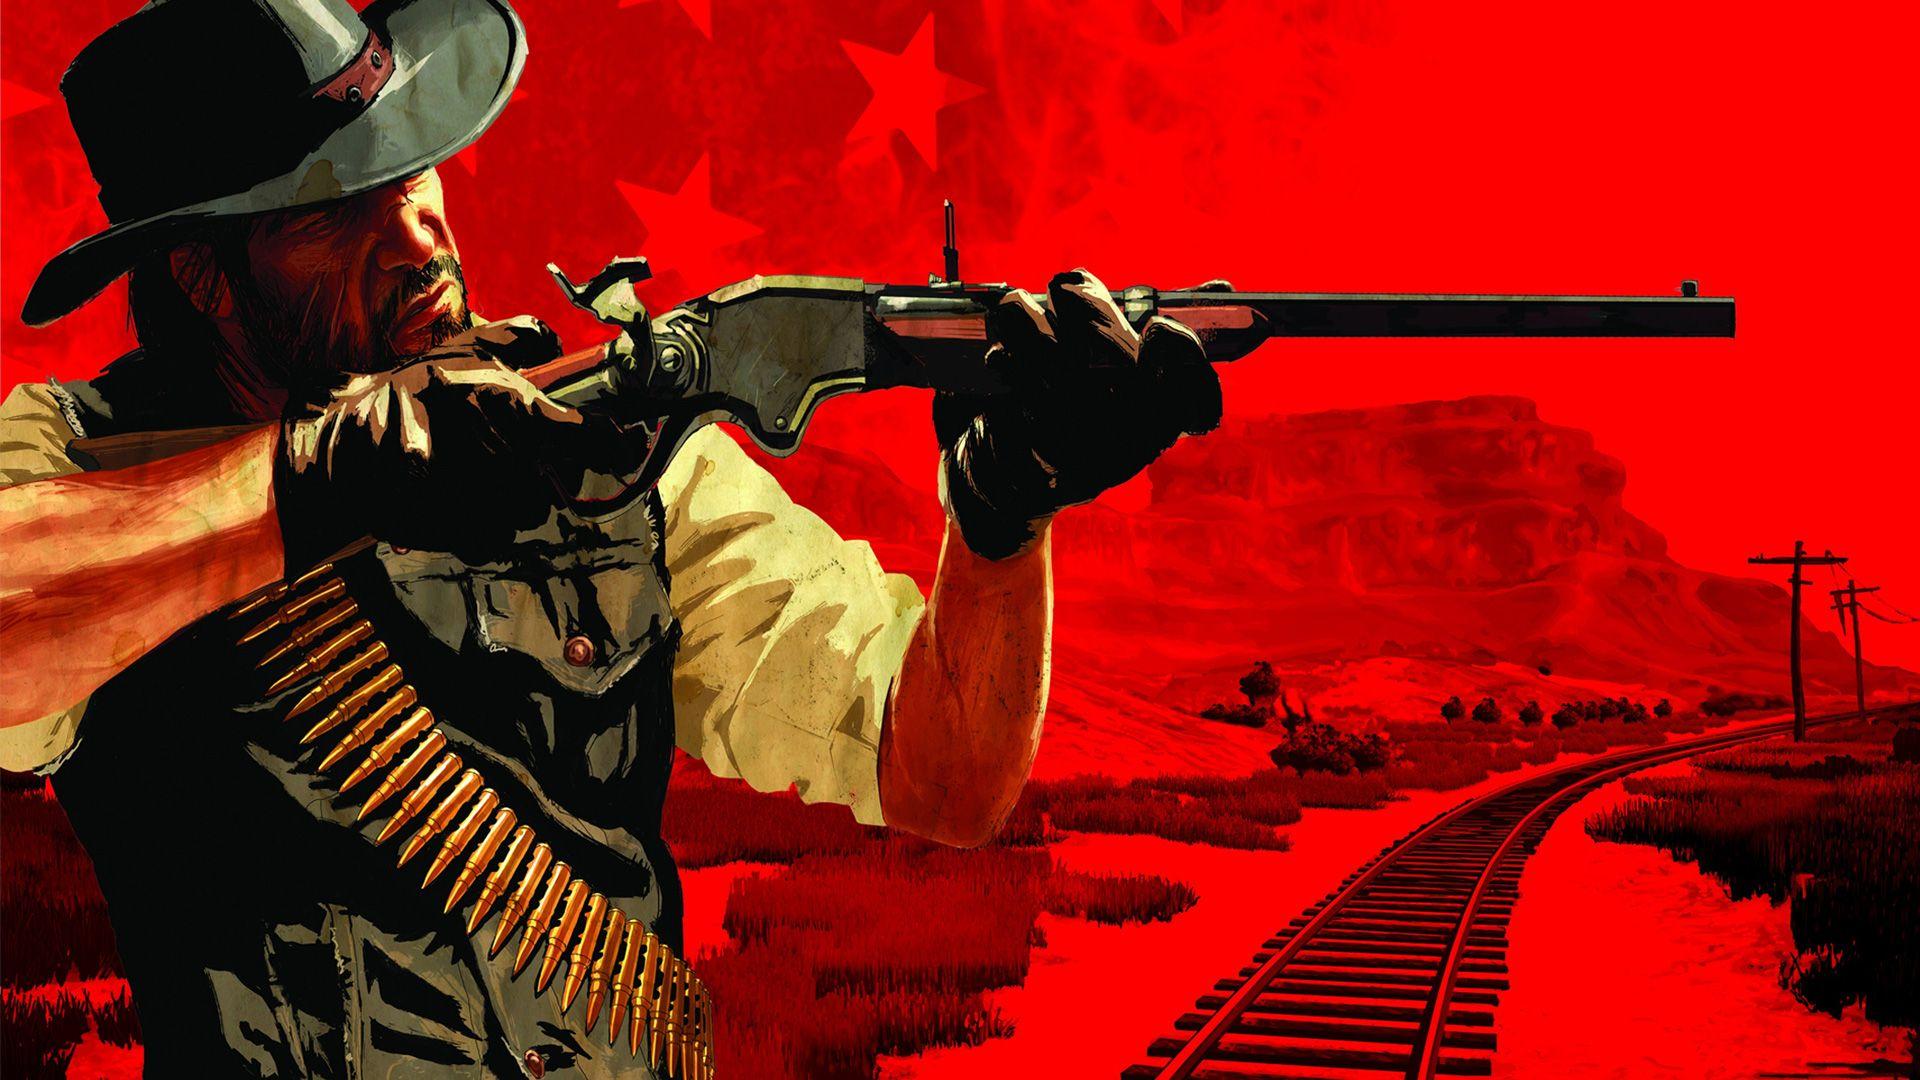 Best 42+ Red Dead Wallpapers on HipWallpapers